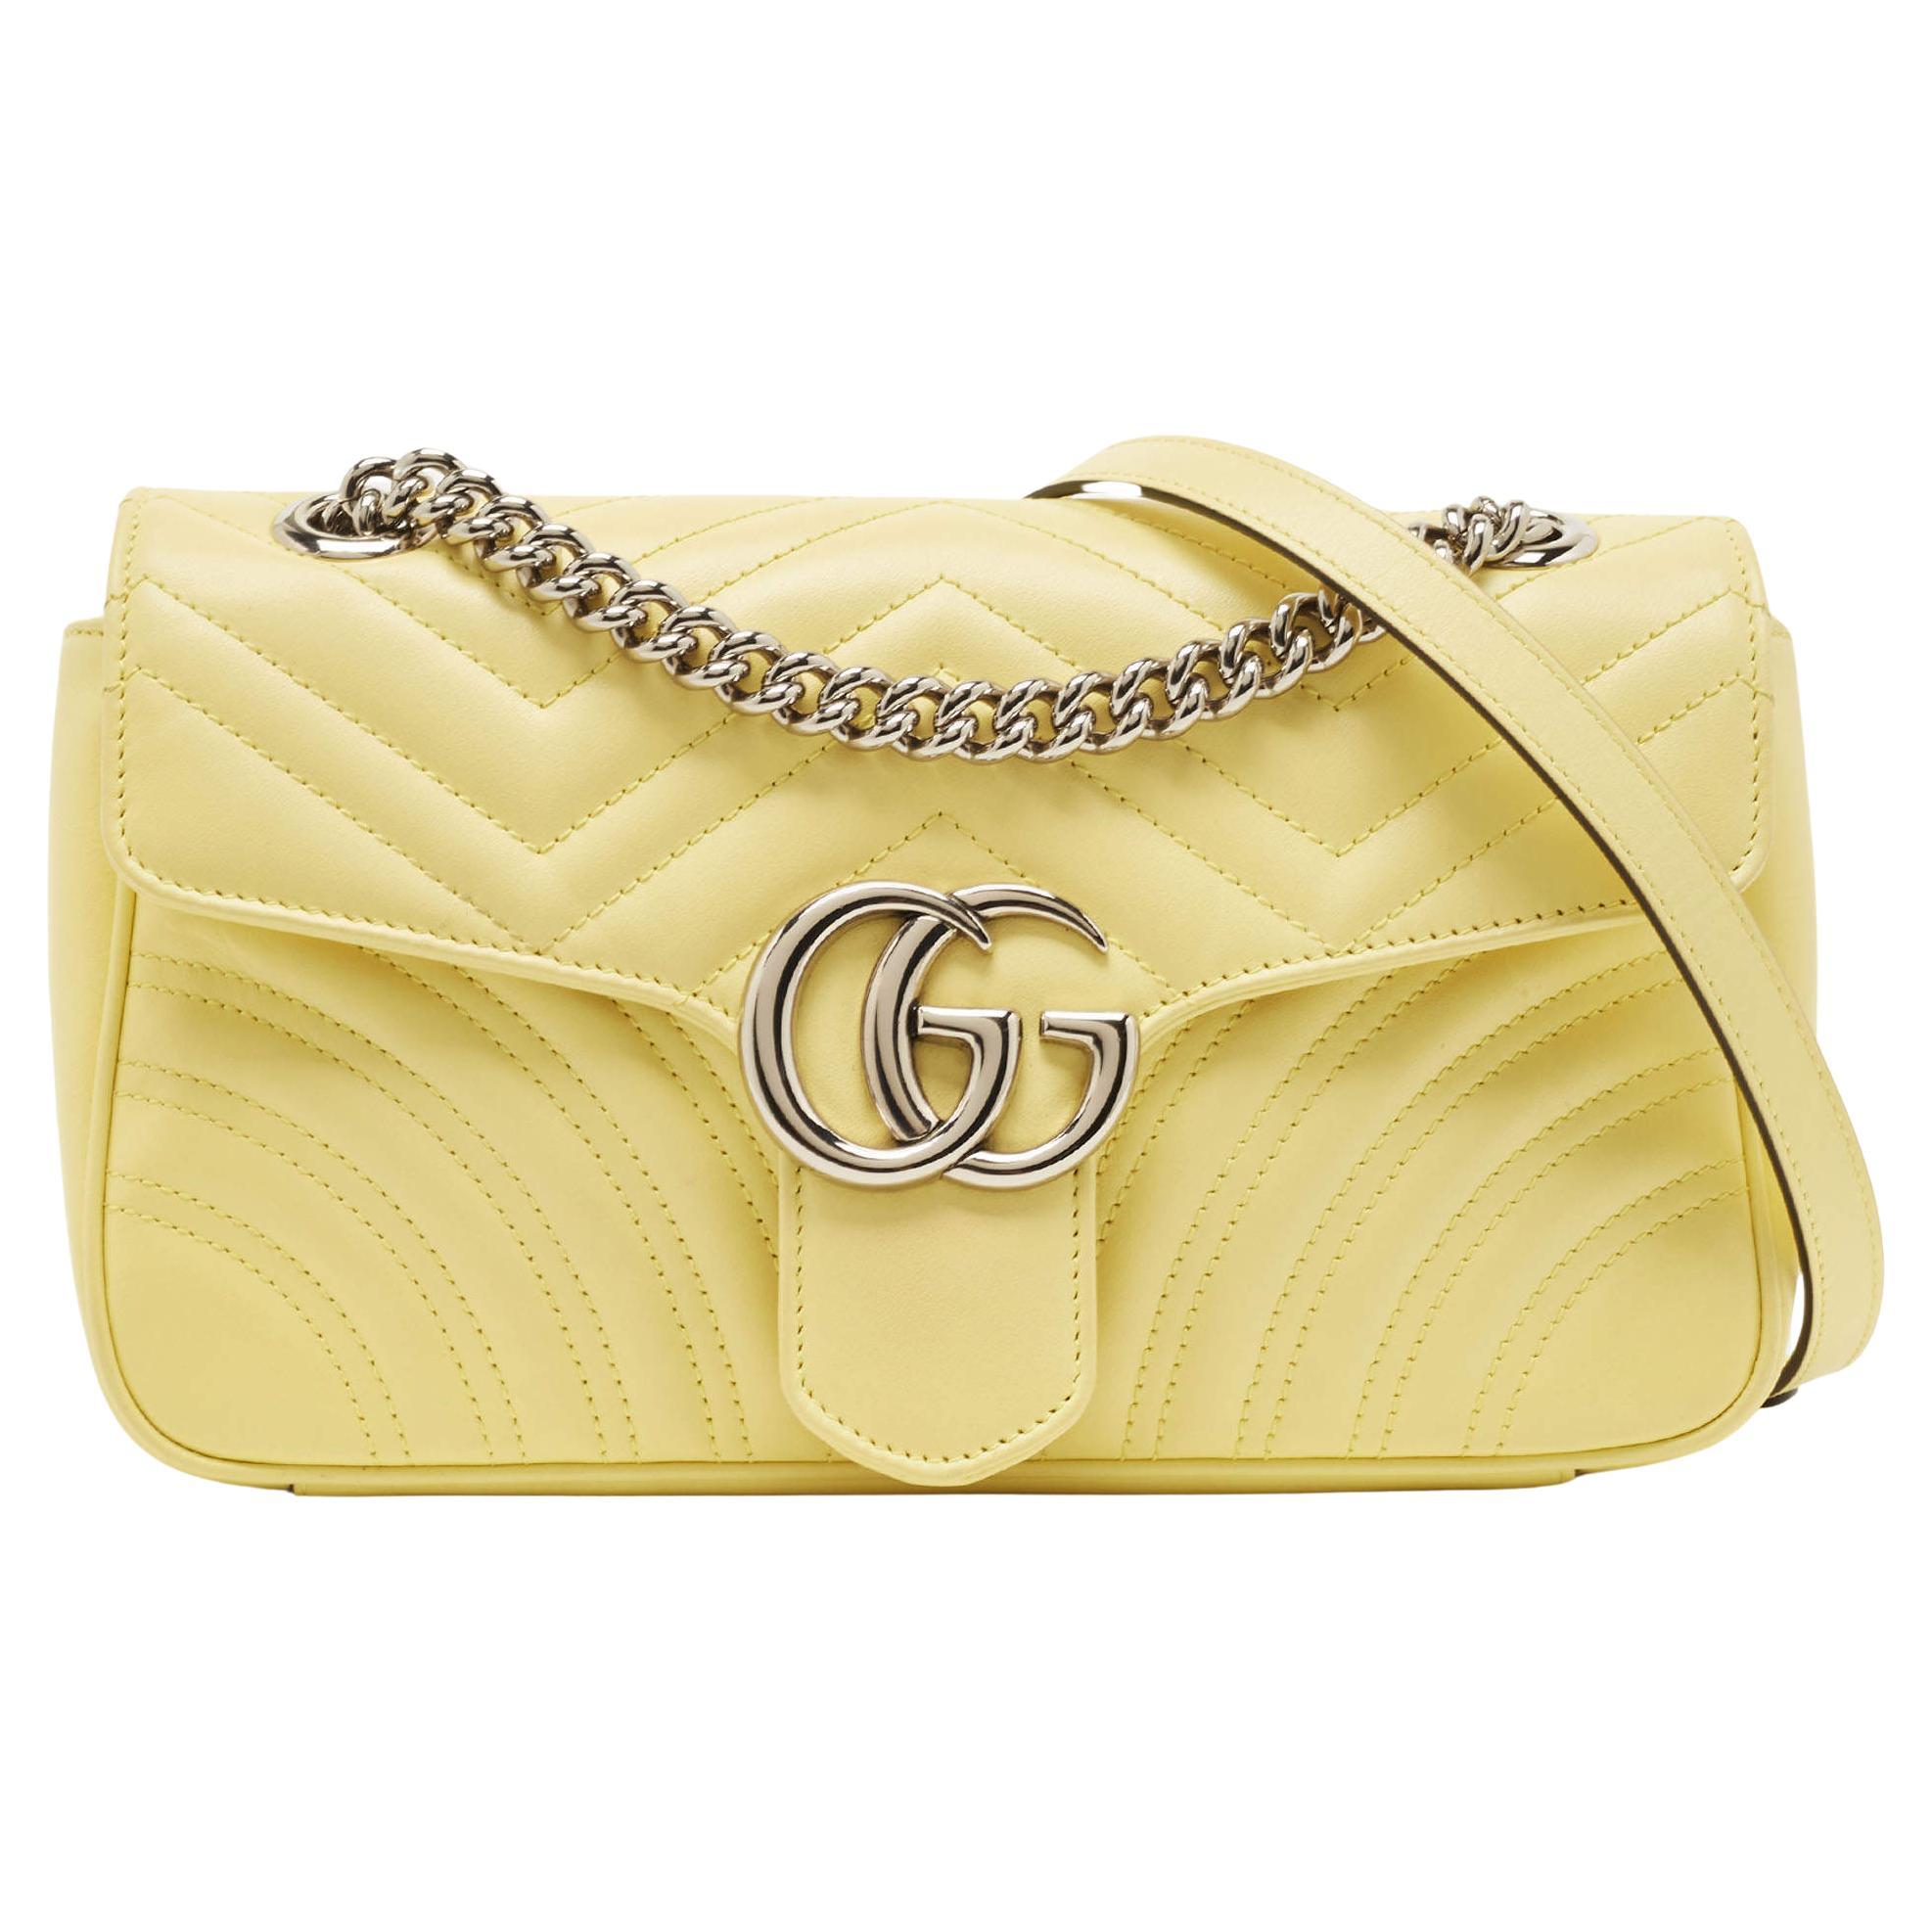 Gucci Yellow Matelassé Leather Small GG Marmont Shoulder Bag